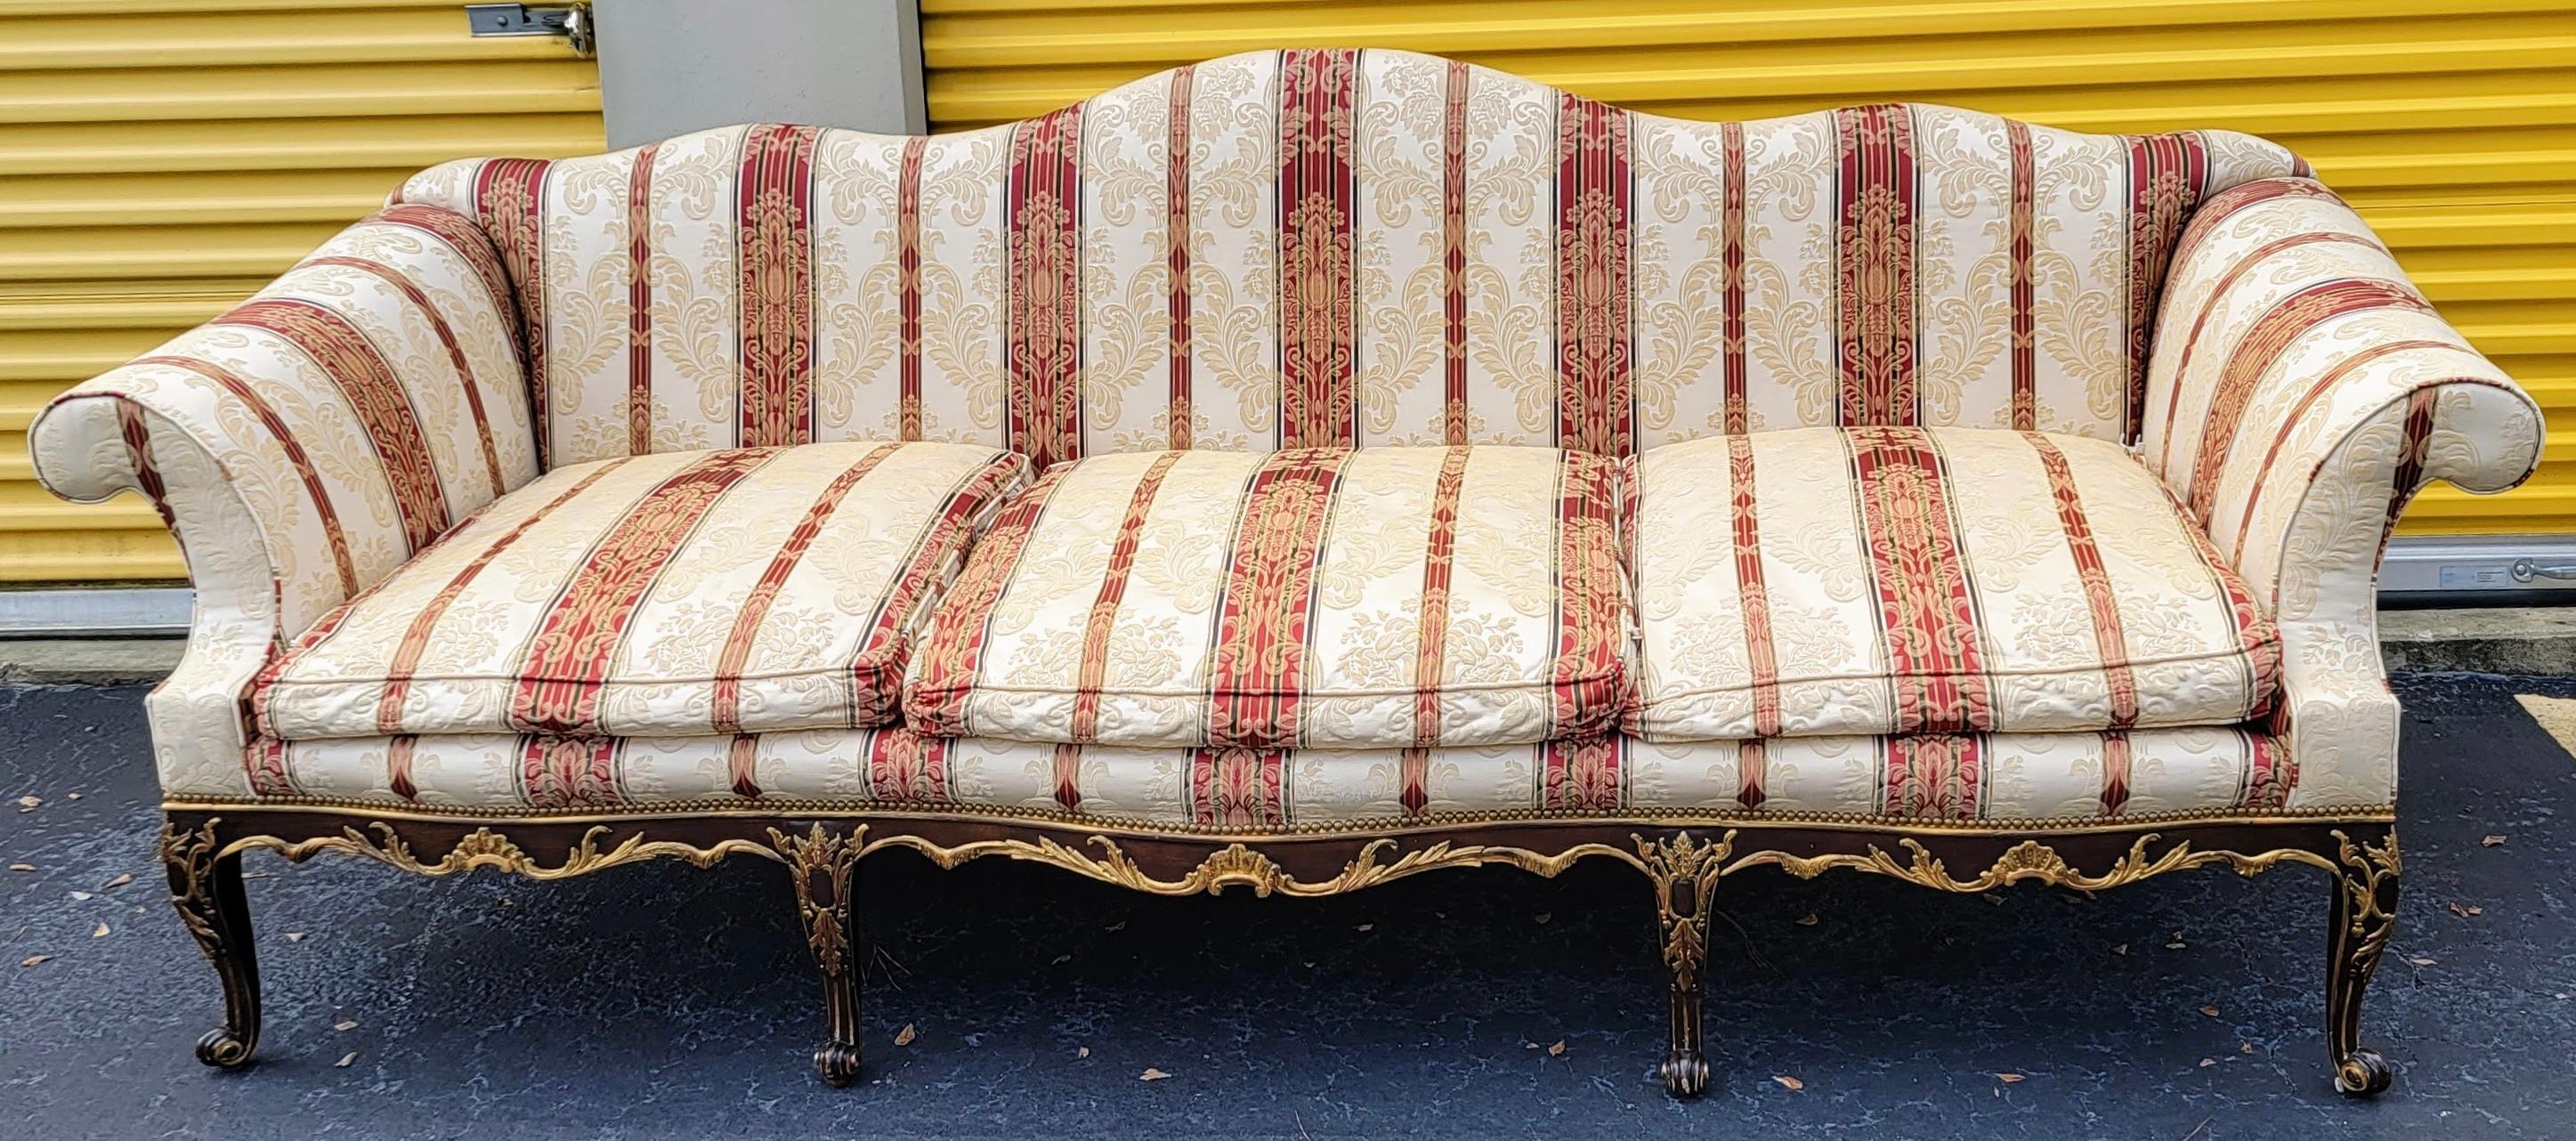 Late 20th-C. French Louis XVI Style Sofa By EJ Victor In Stripe Damask For Sale 2